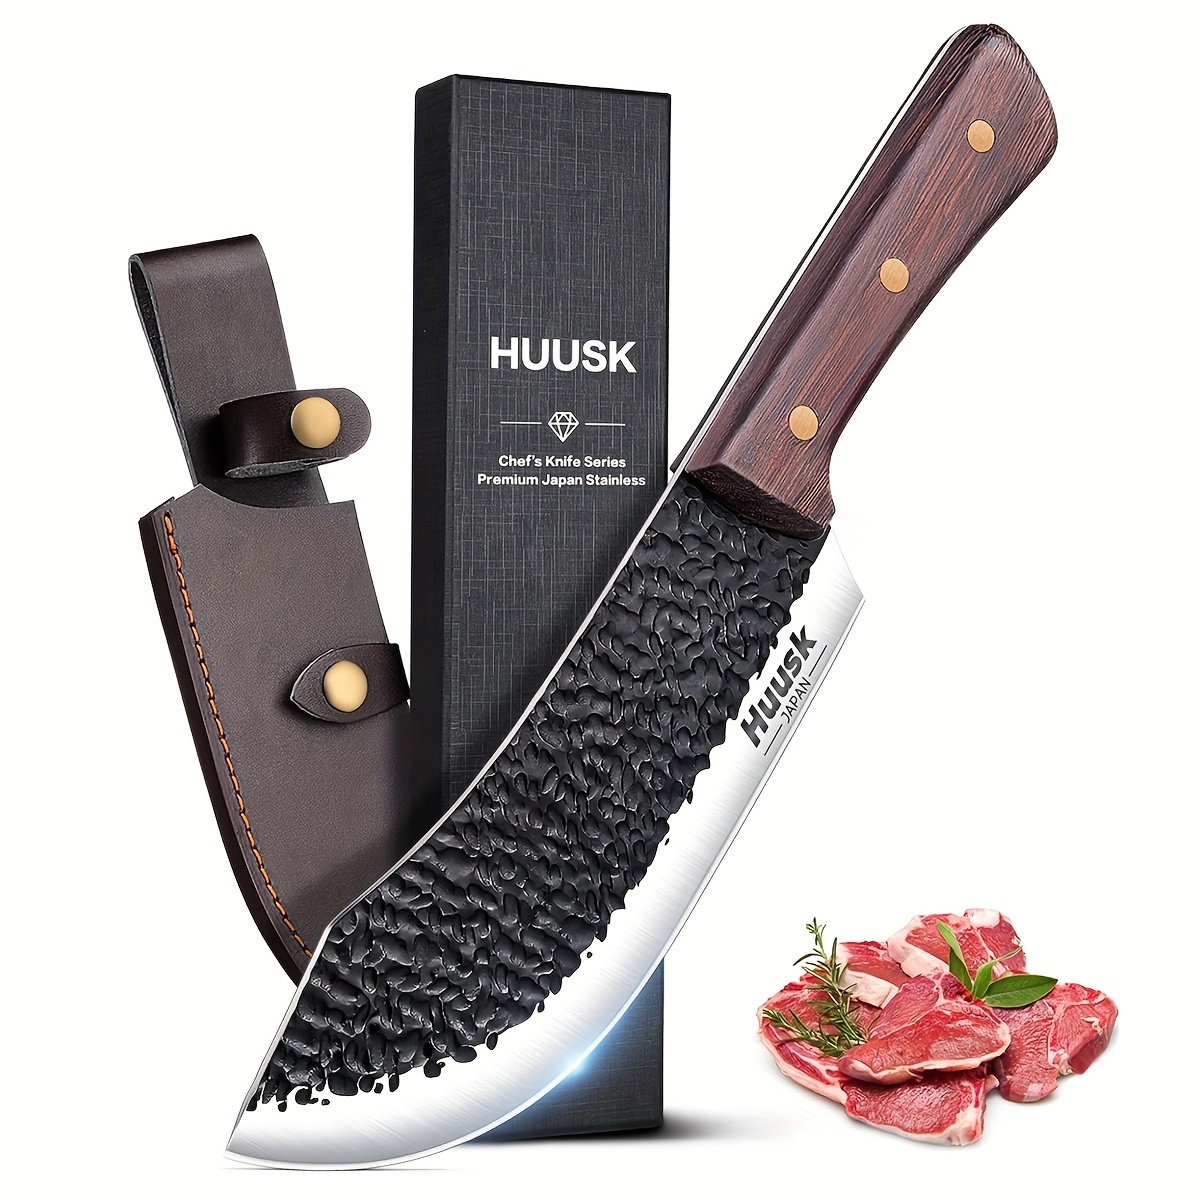 

Meat Cleaver Knife - 7" Butcher Knife For Meat Cutting - Hand Forged Meat Knife - High Carbon Chopping Knife With Ergonomic Handle - Ultra Sharp Kitchen Chef Knives For Home Outdoor Bbq